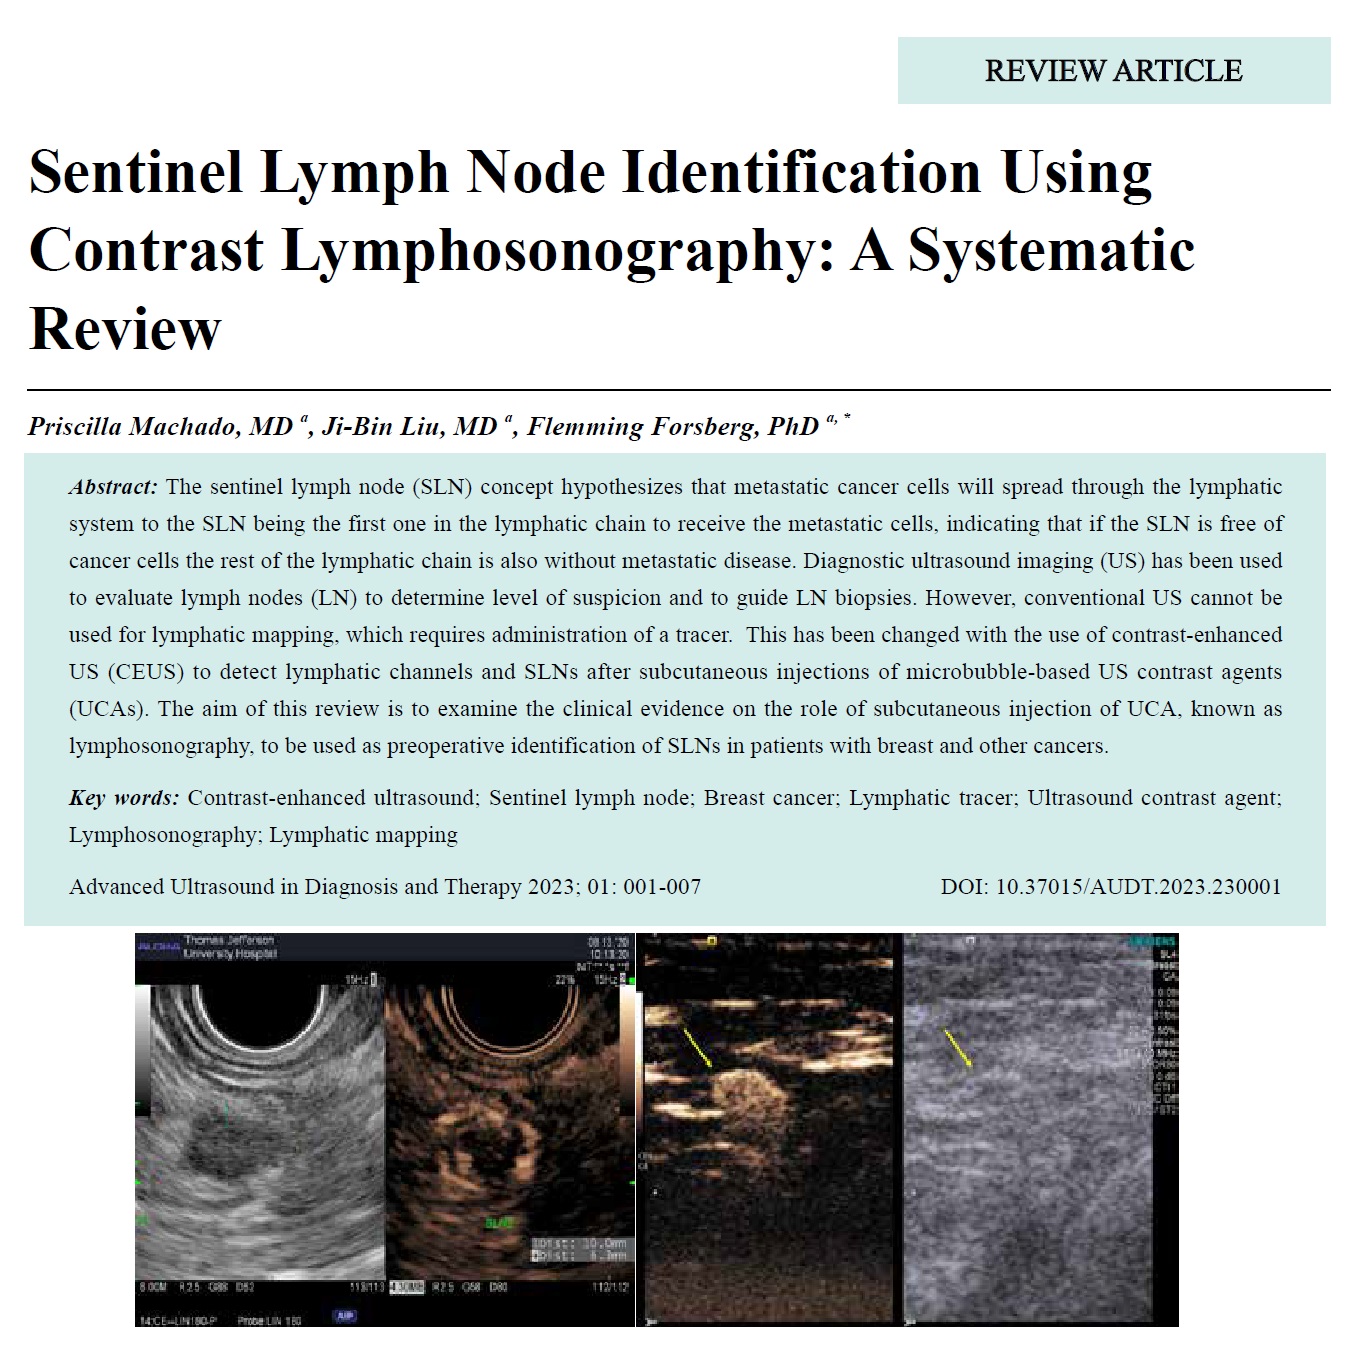 Sentinel Lymph Node Identification Using Contrast Lymphosonography: A Systematic Review